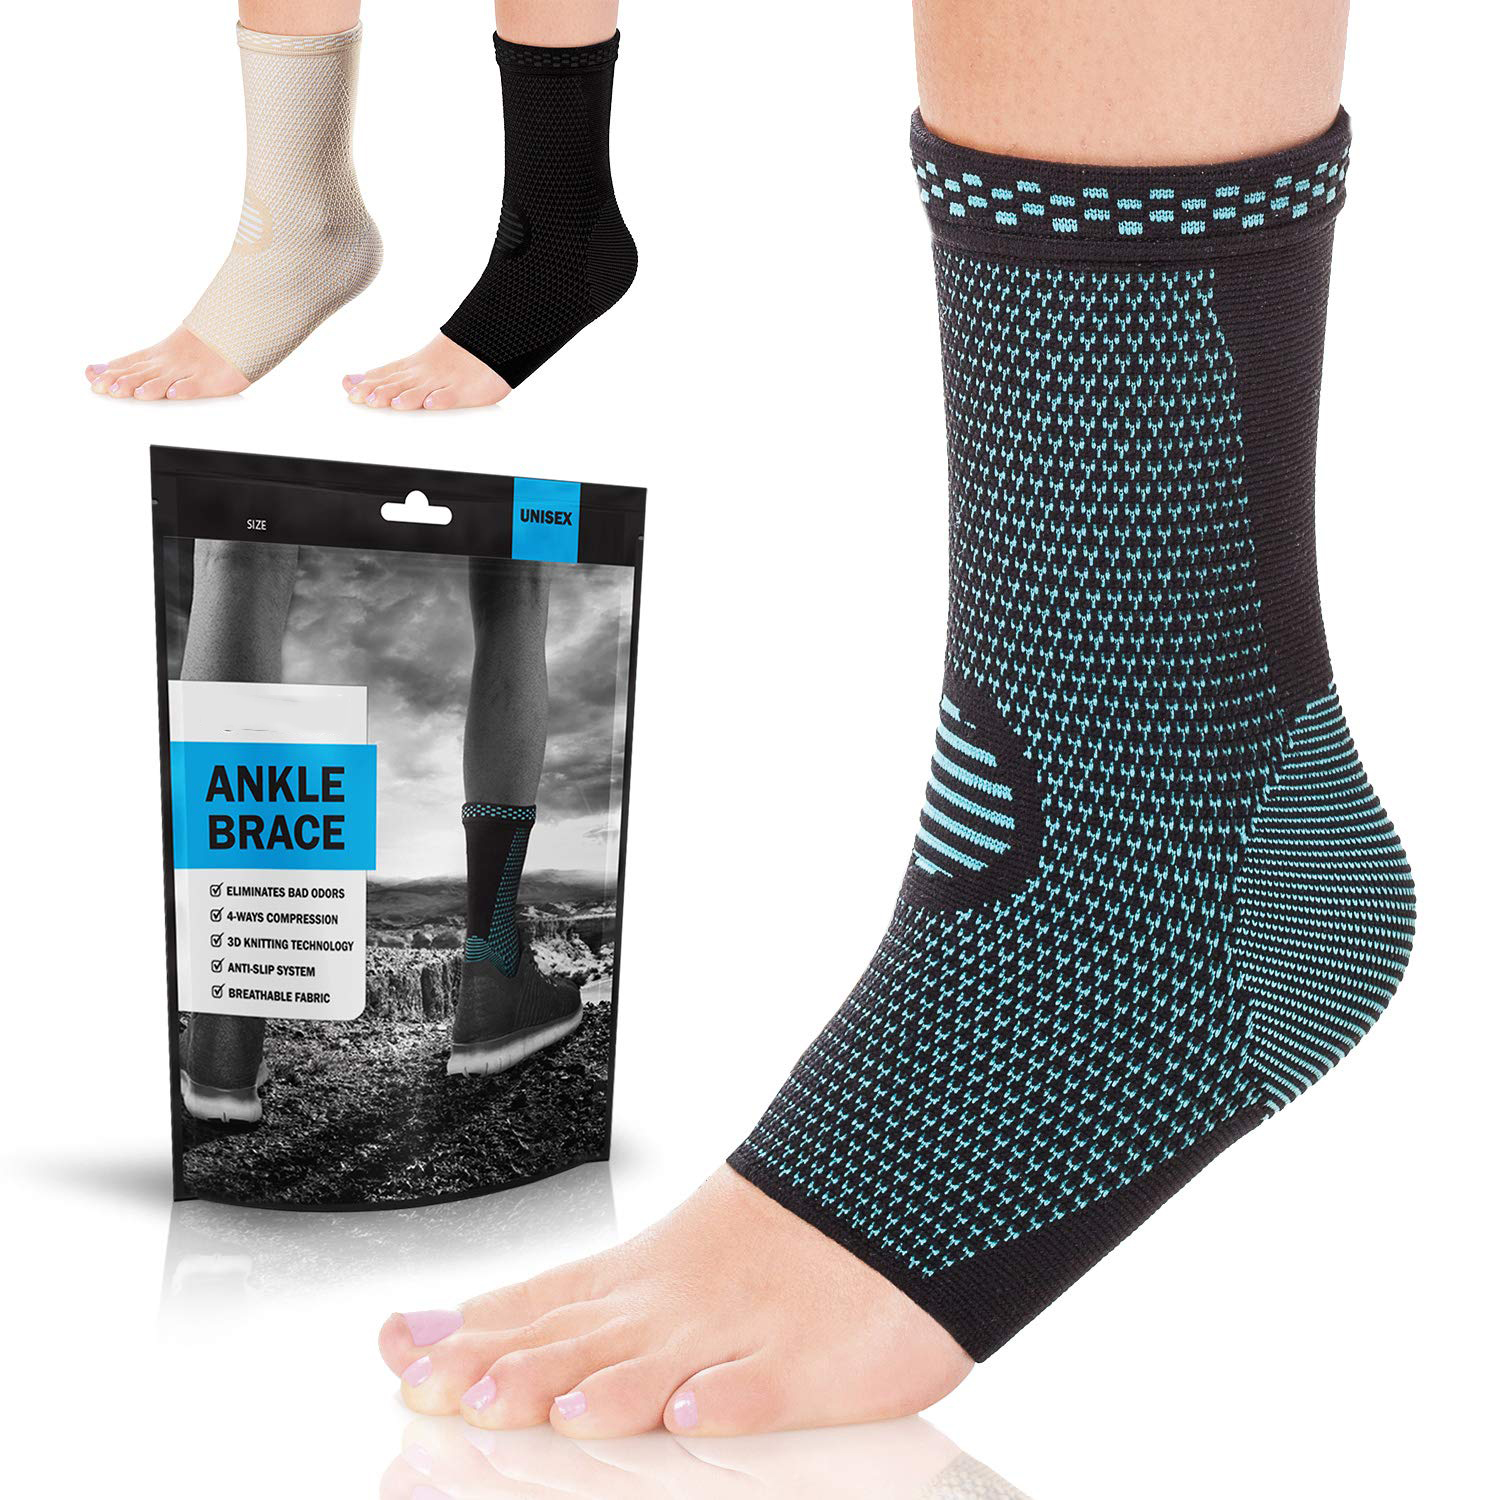 OEM Manufacturer Elbow Orthosis - Ankle Brace Compression Support Sleeve (Pair) for Injury Recovery, Joint Pain and More. Achilles Tendon Support, Plantar Fasciitis Foot Socks with Arch Support, E...